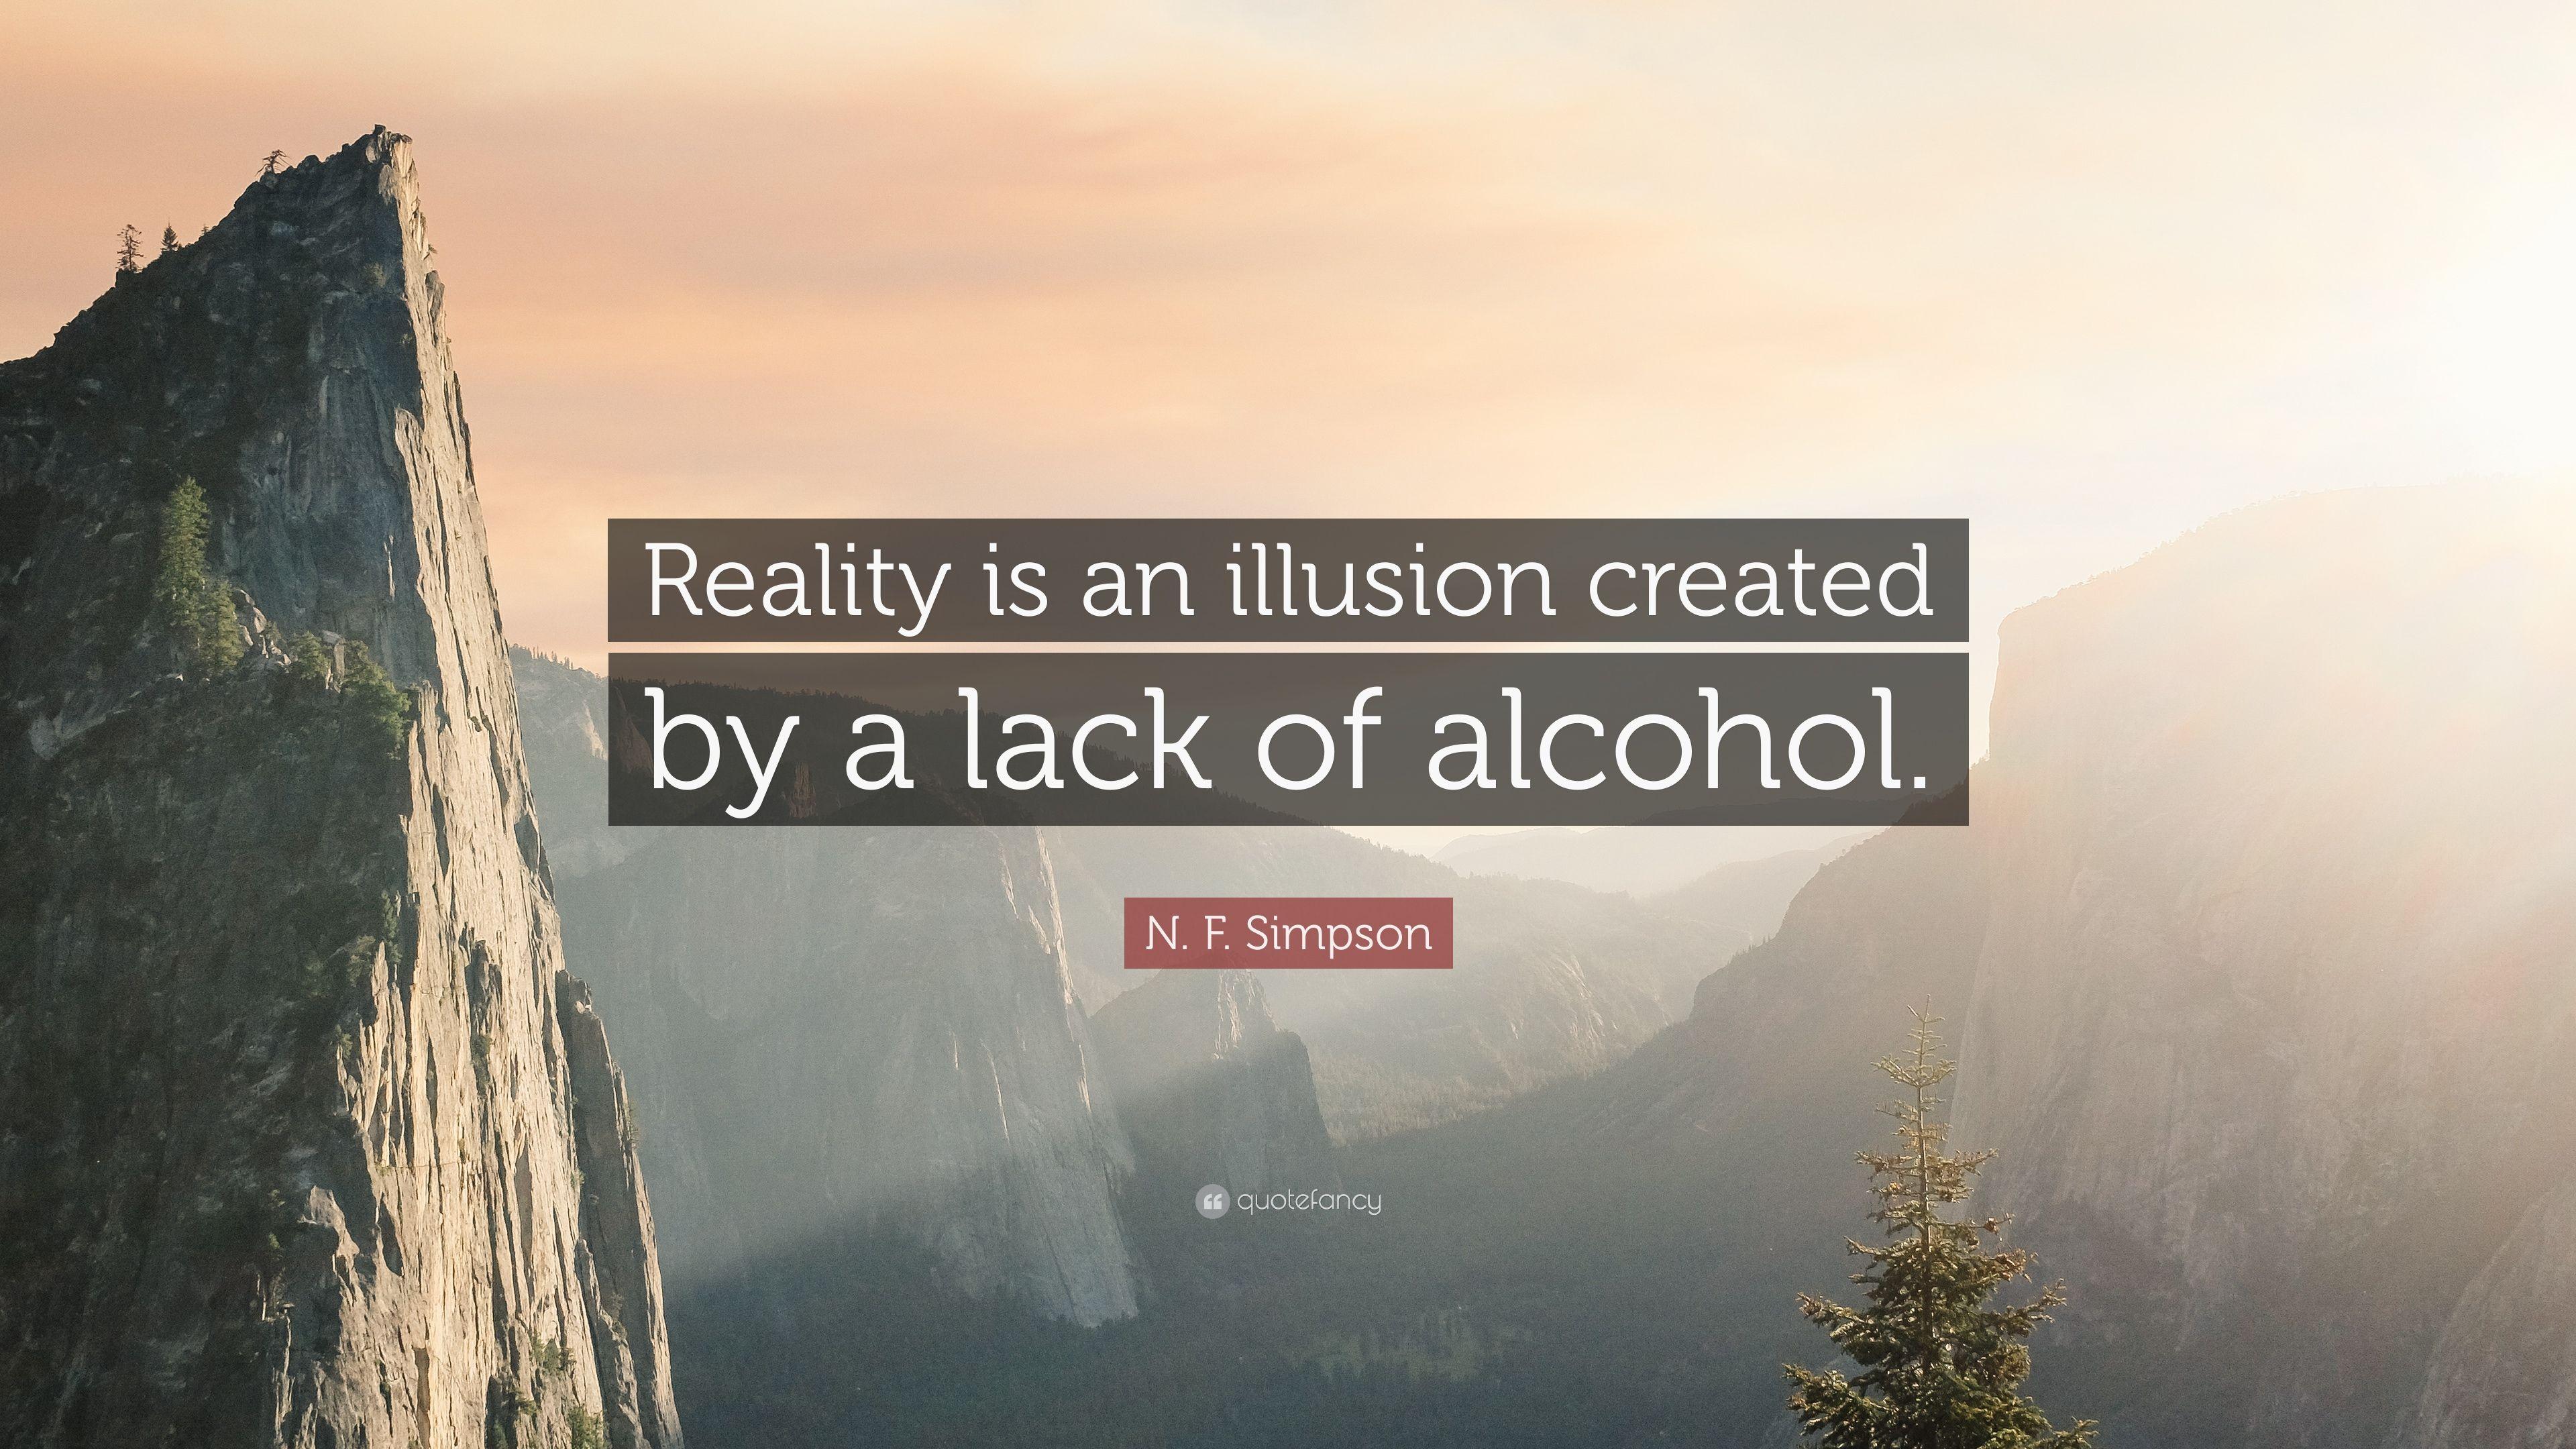 N. F. Simpson Quotes (4 wallpaper)